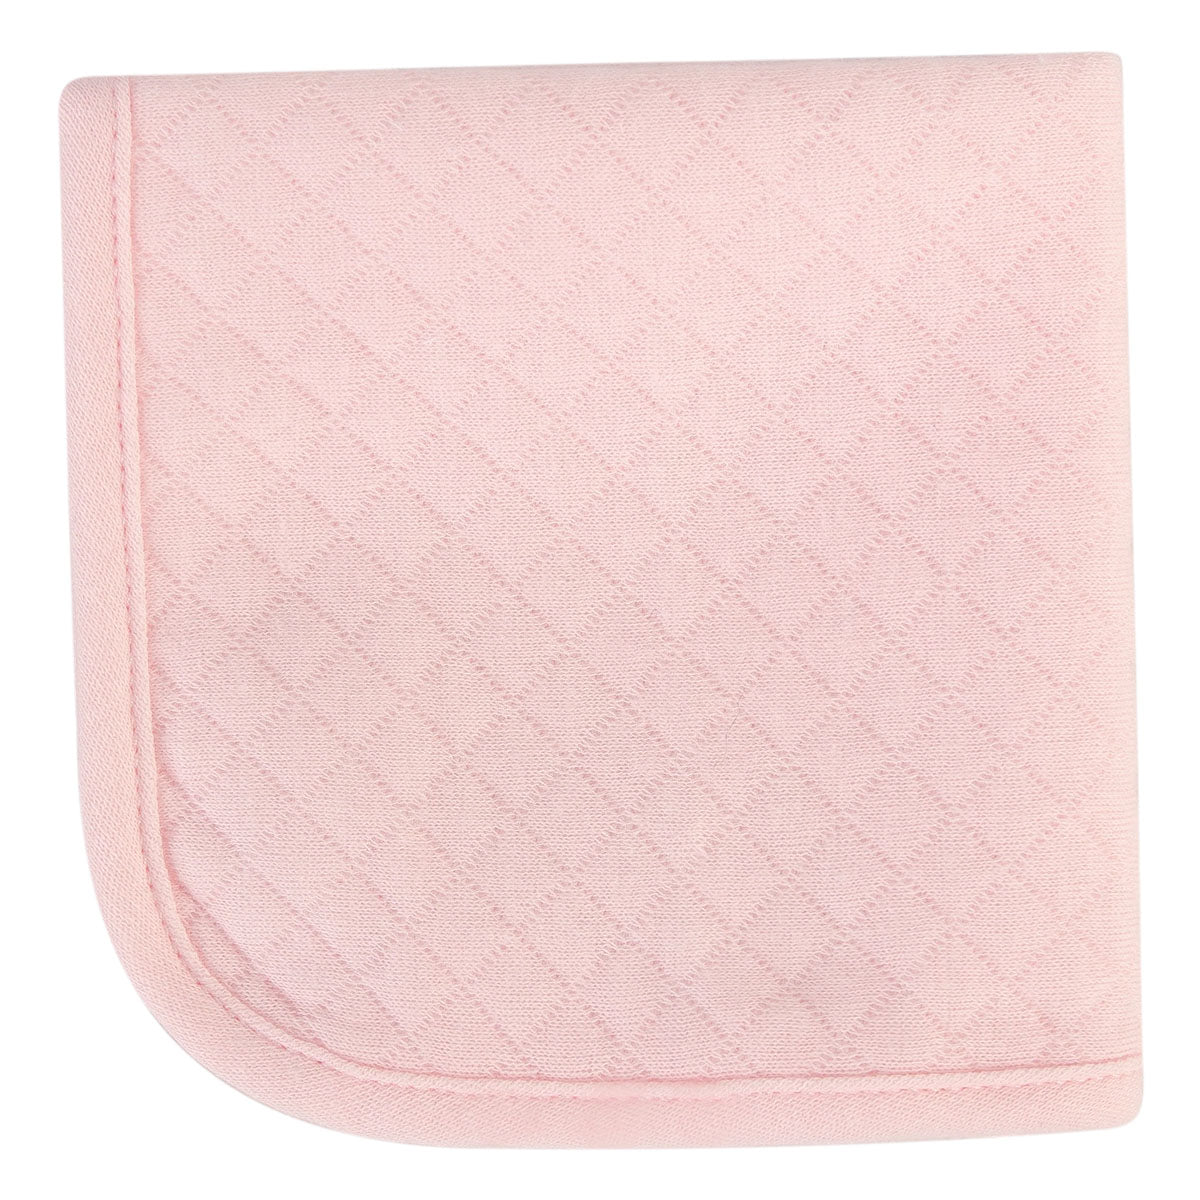 Hudson Baby - 6pc Quilted Washcloths - Winter Forest